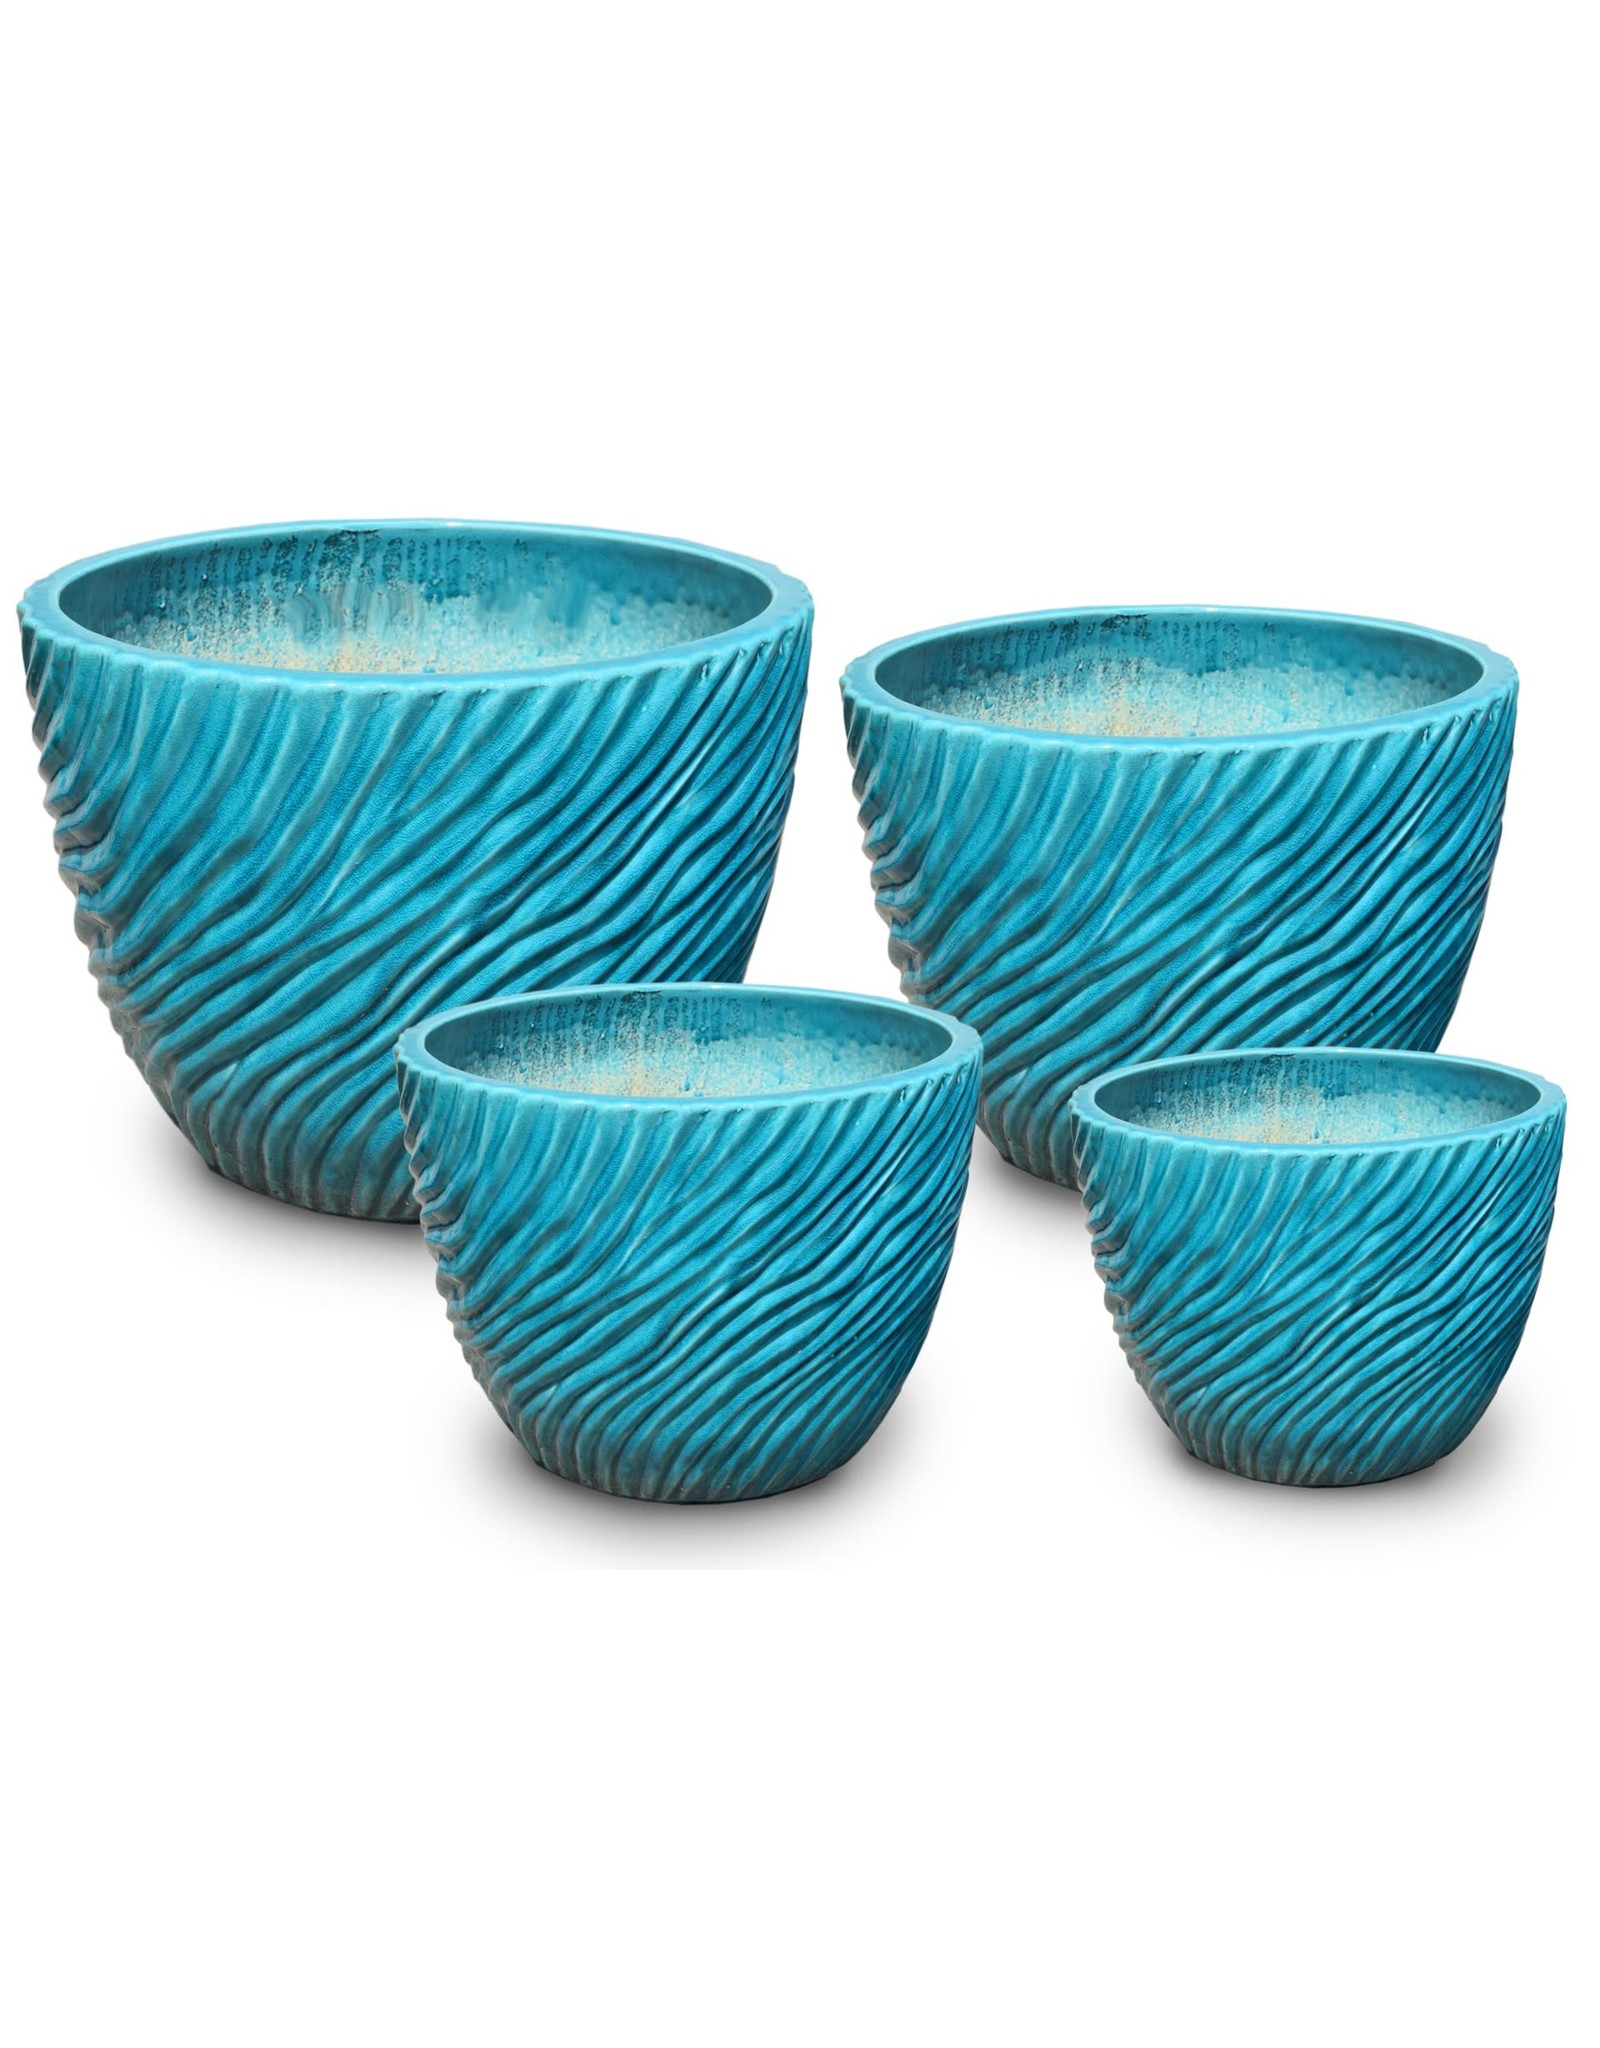 Ripple Low Egg Pot - Crackle Turquoise - XL